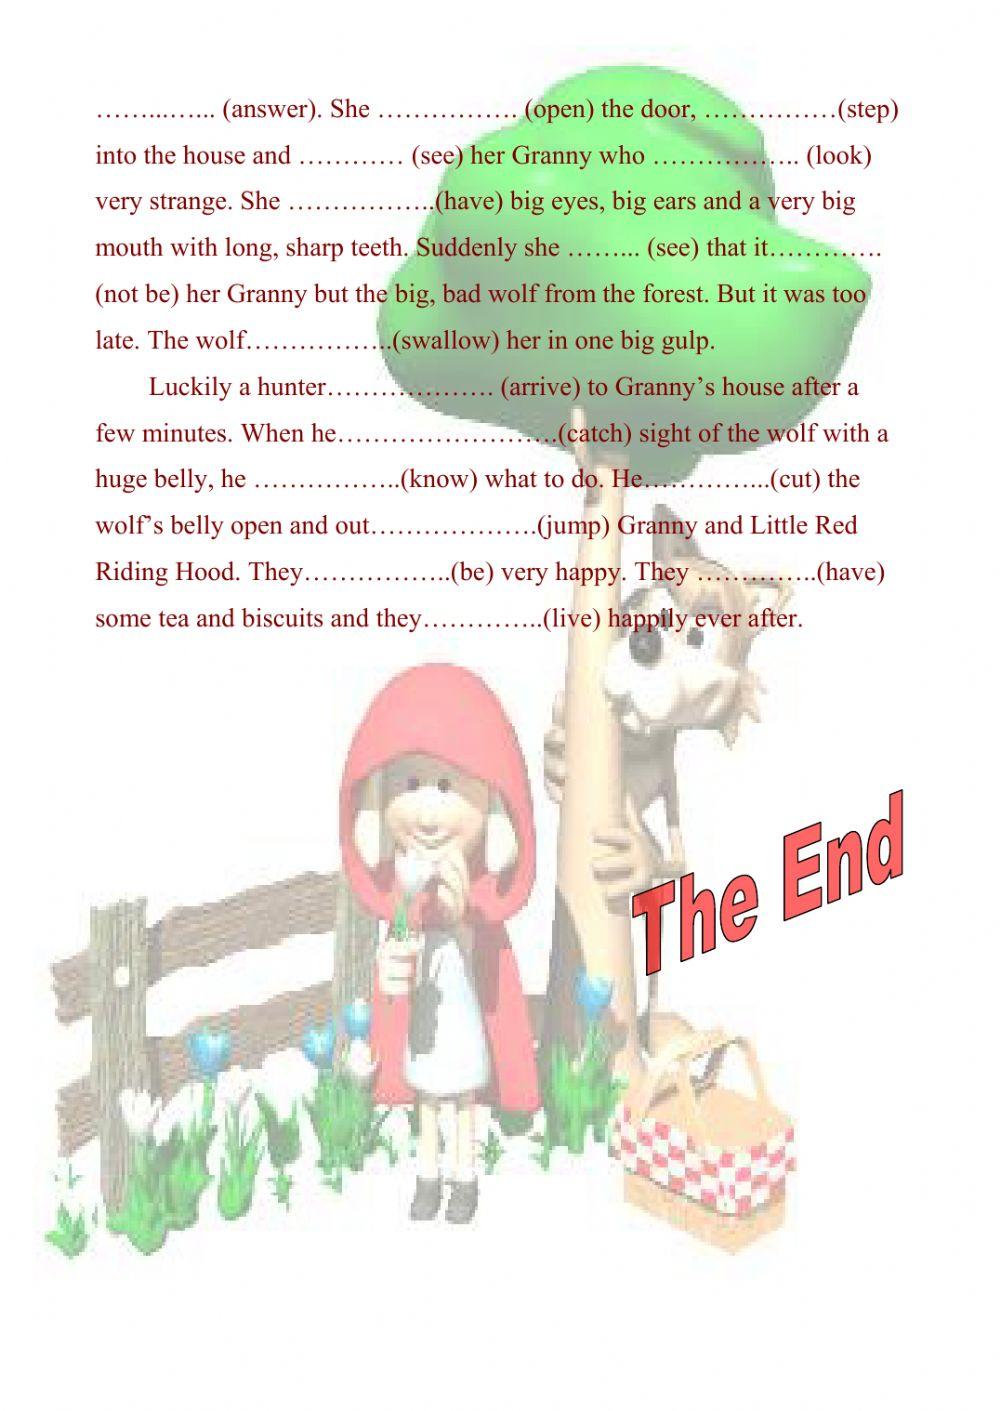 Little Red Riding Hood - Past Simple